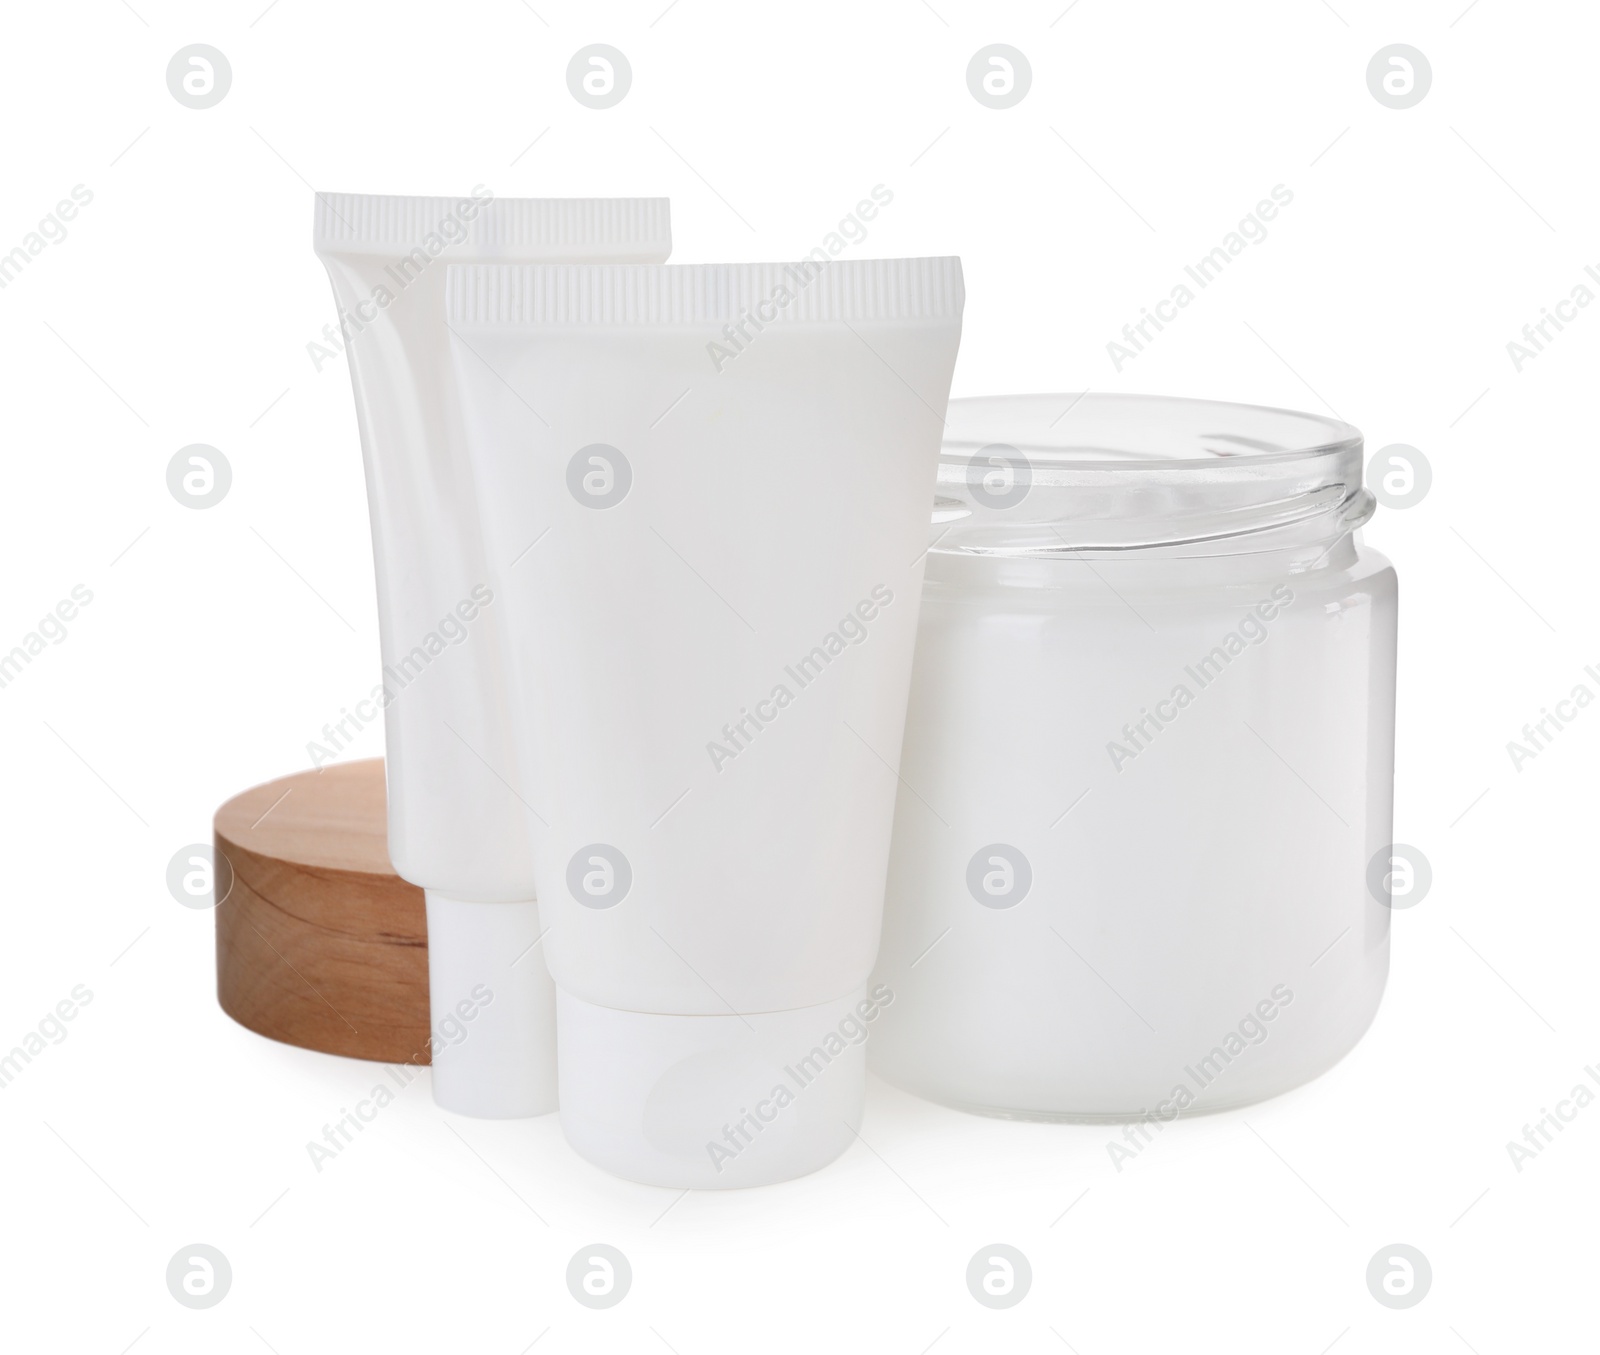 Photo of Jar and tubes of hand cream on white background